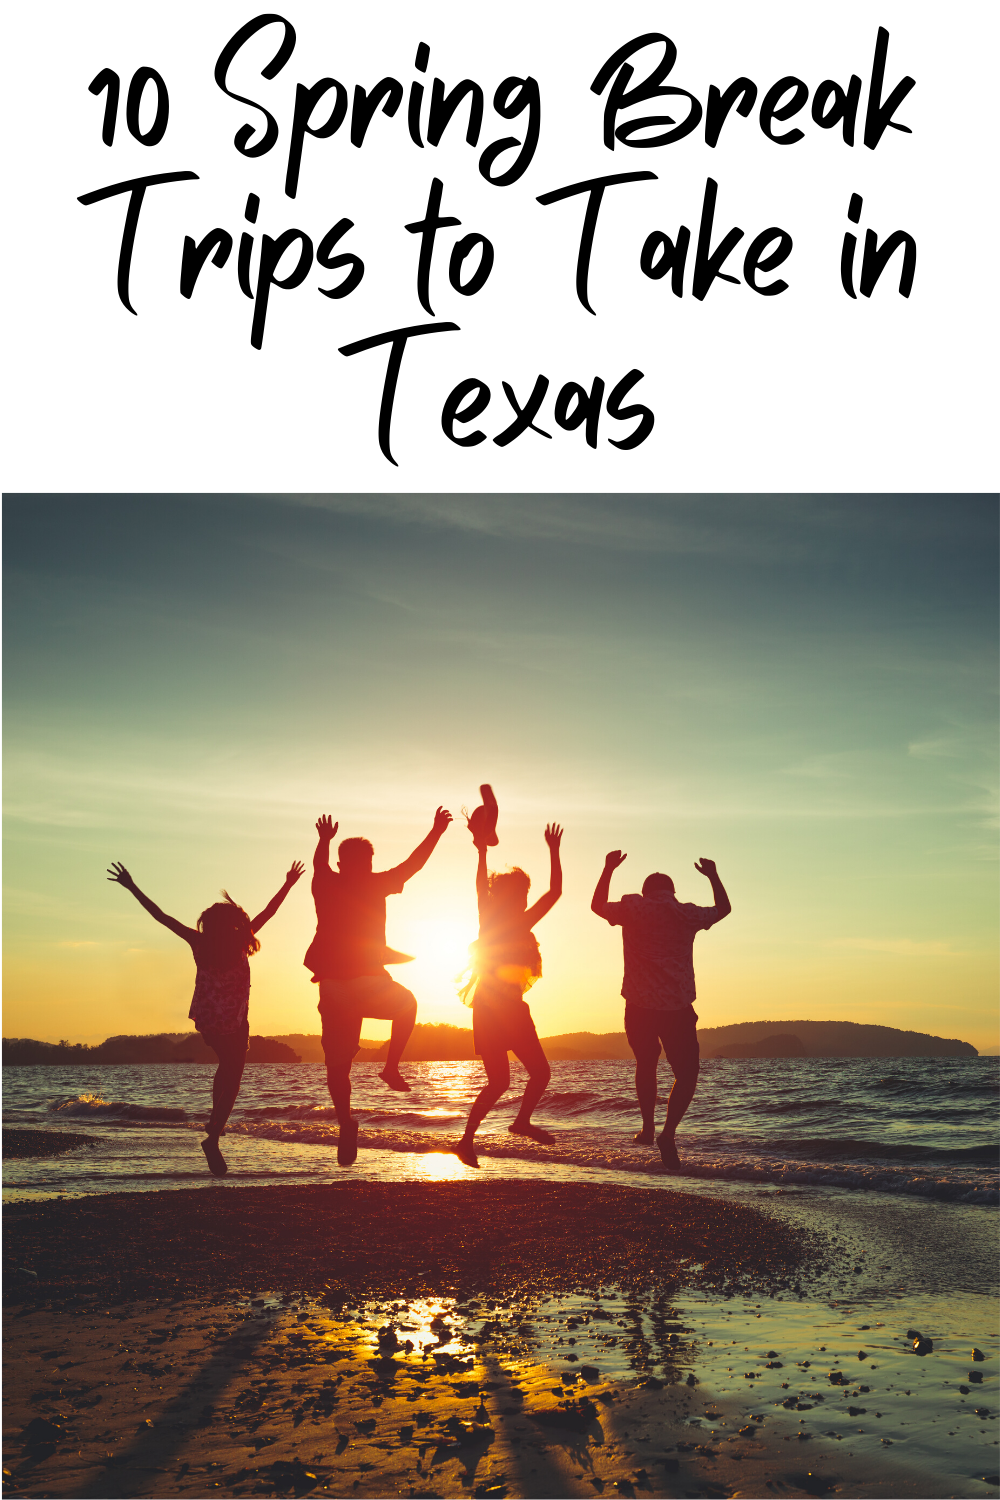 Spring break in San Antonio is fun and exciting. You can check out these 10 spring break trips to take in Texas to stay closer to home while still having a blast this spring break. 